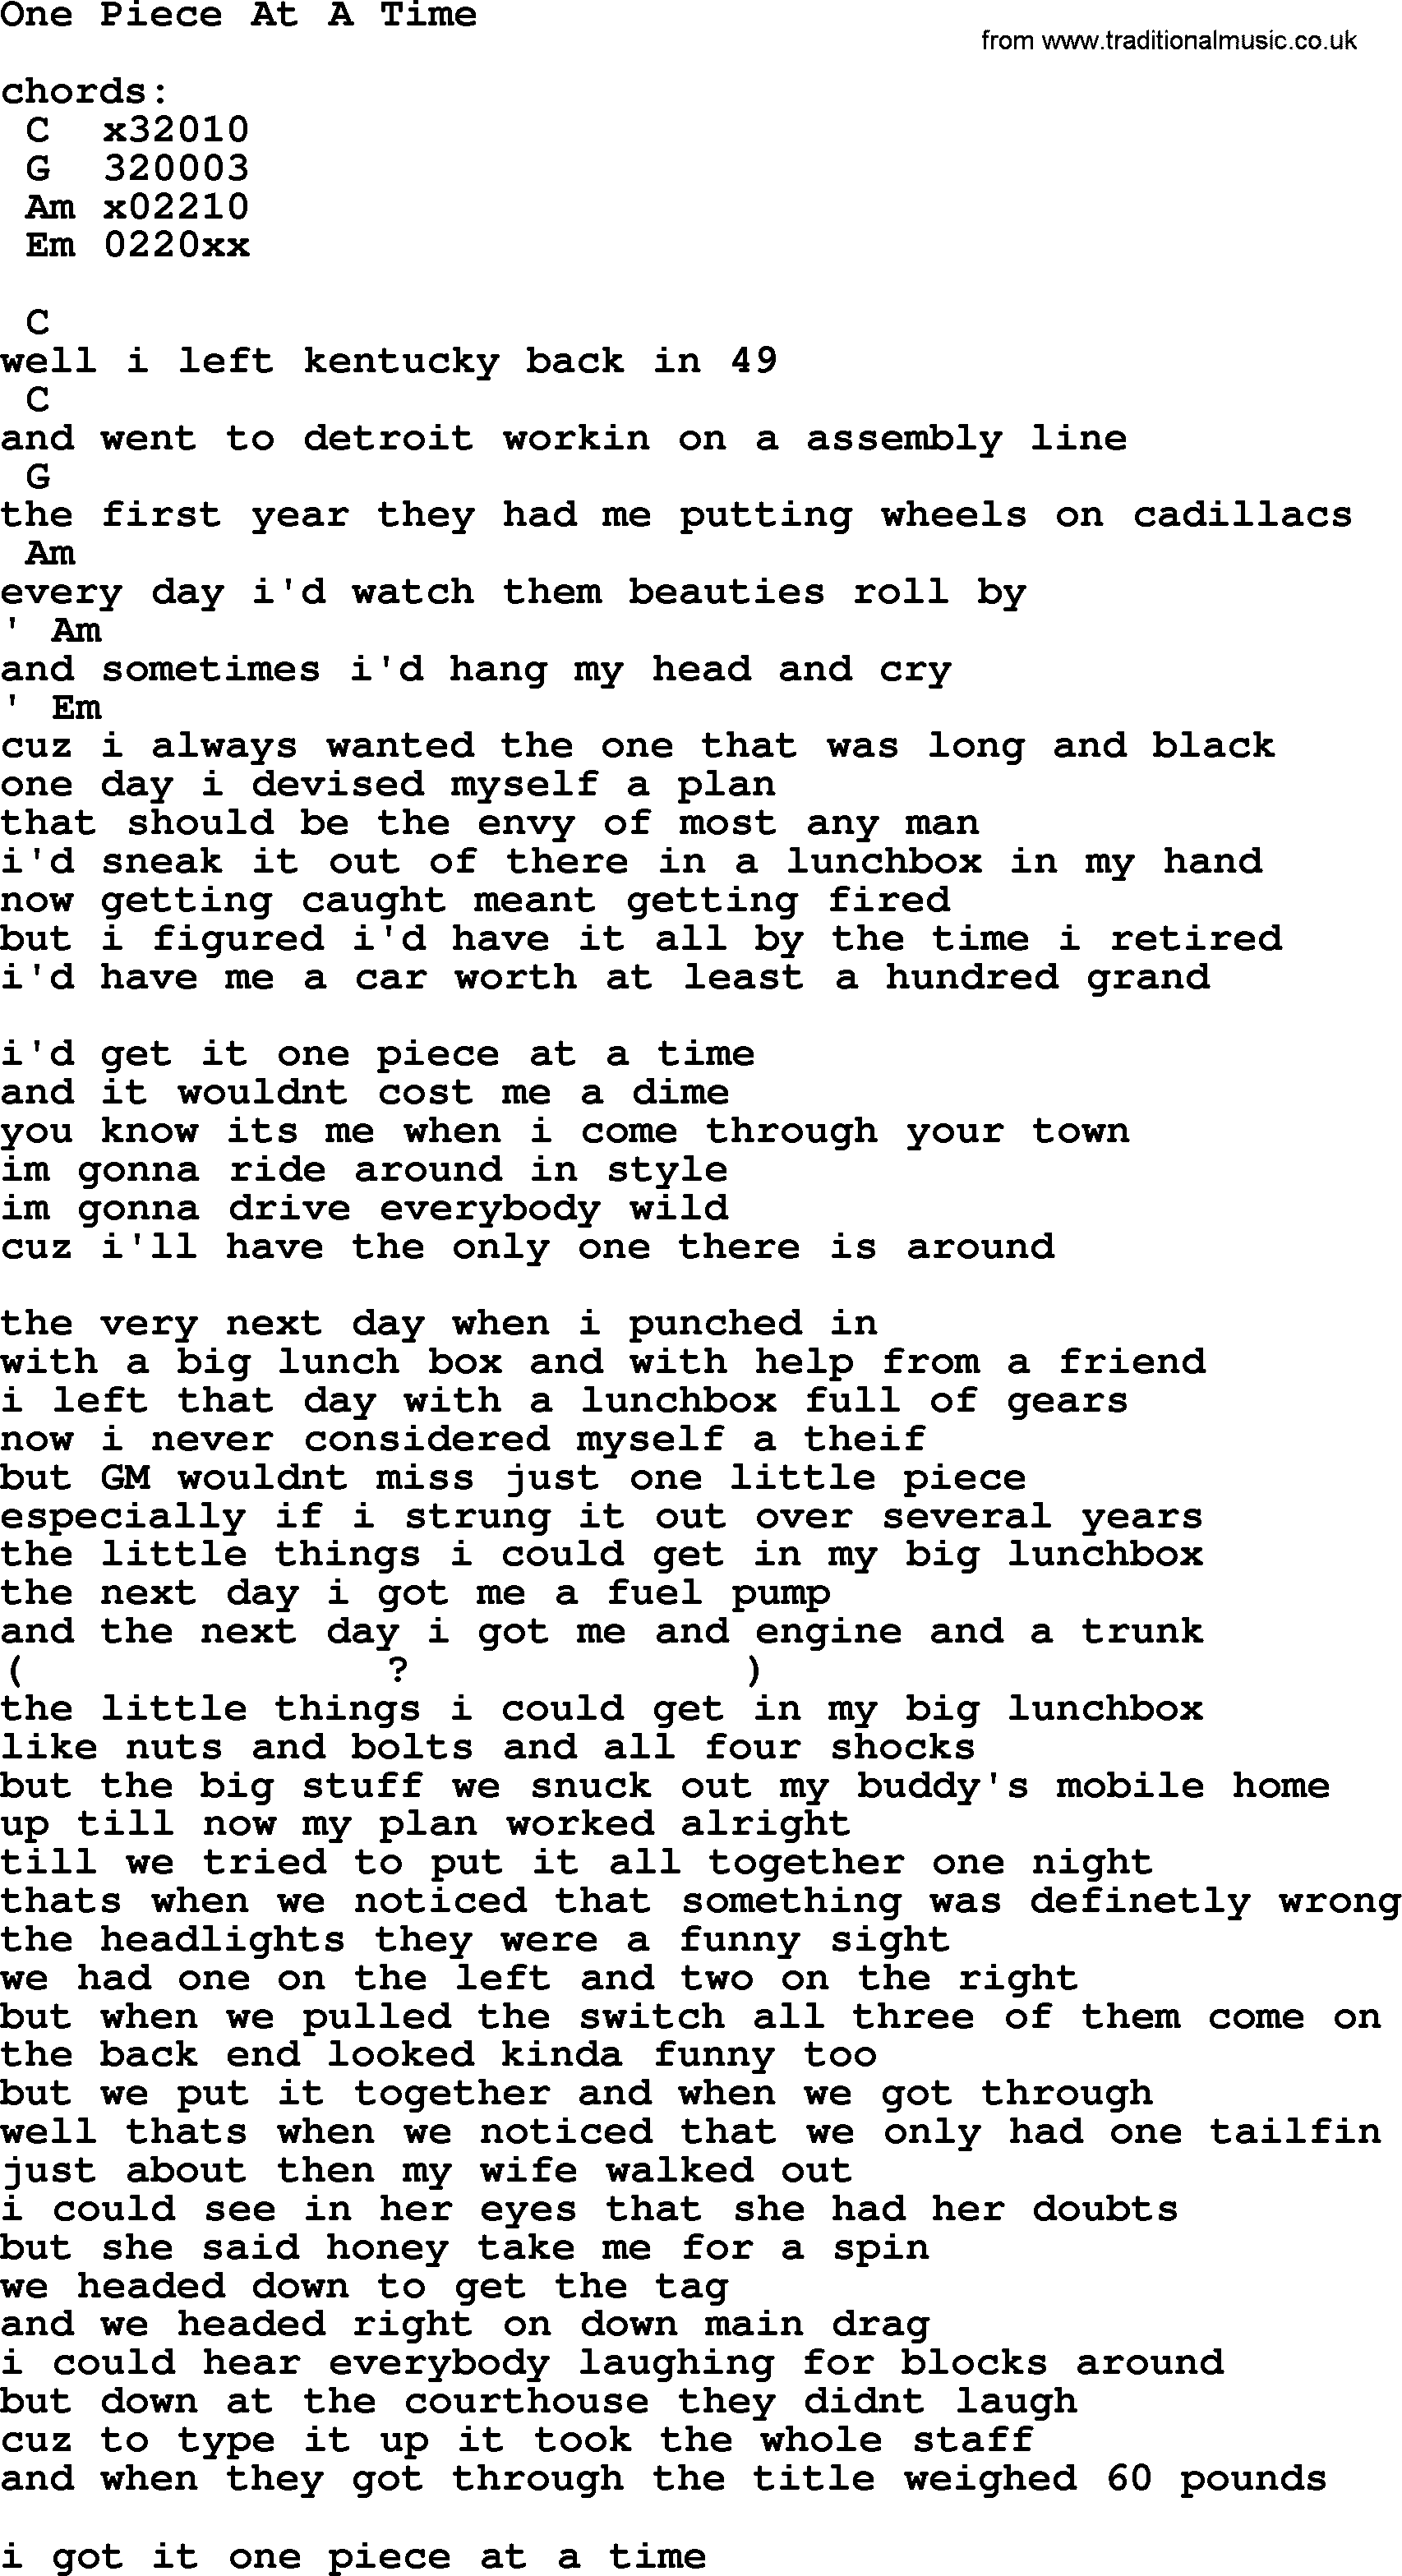 Johnny Cash song One Piece At A Time, lyrics and chords